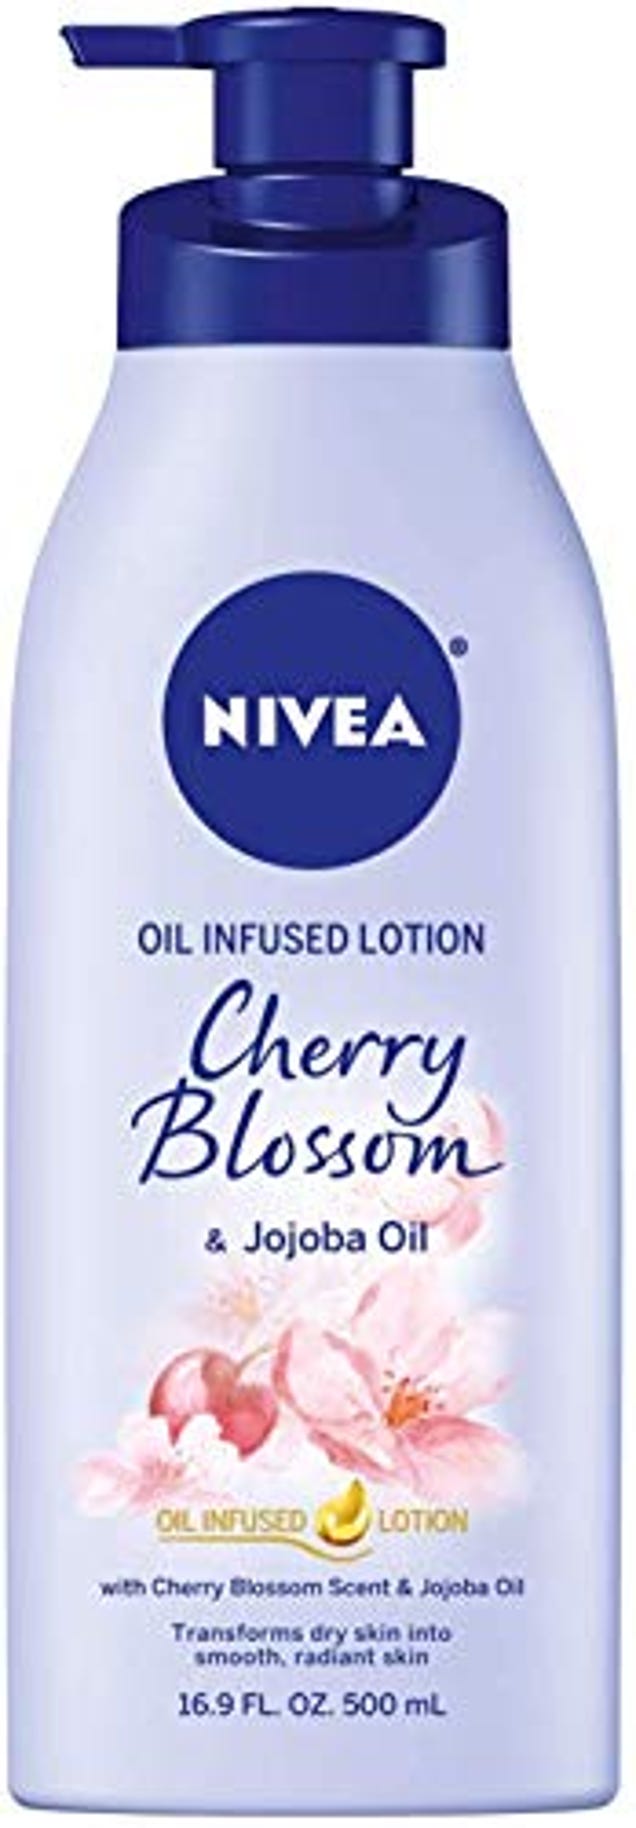 Nivea Oil Infused Body Lotion, Now 14% Off